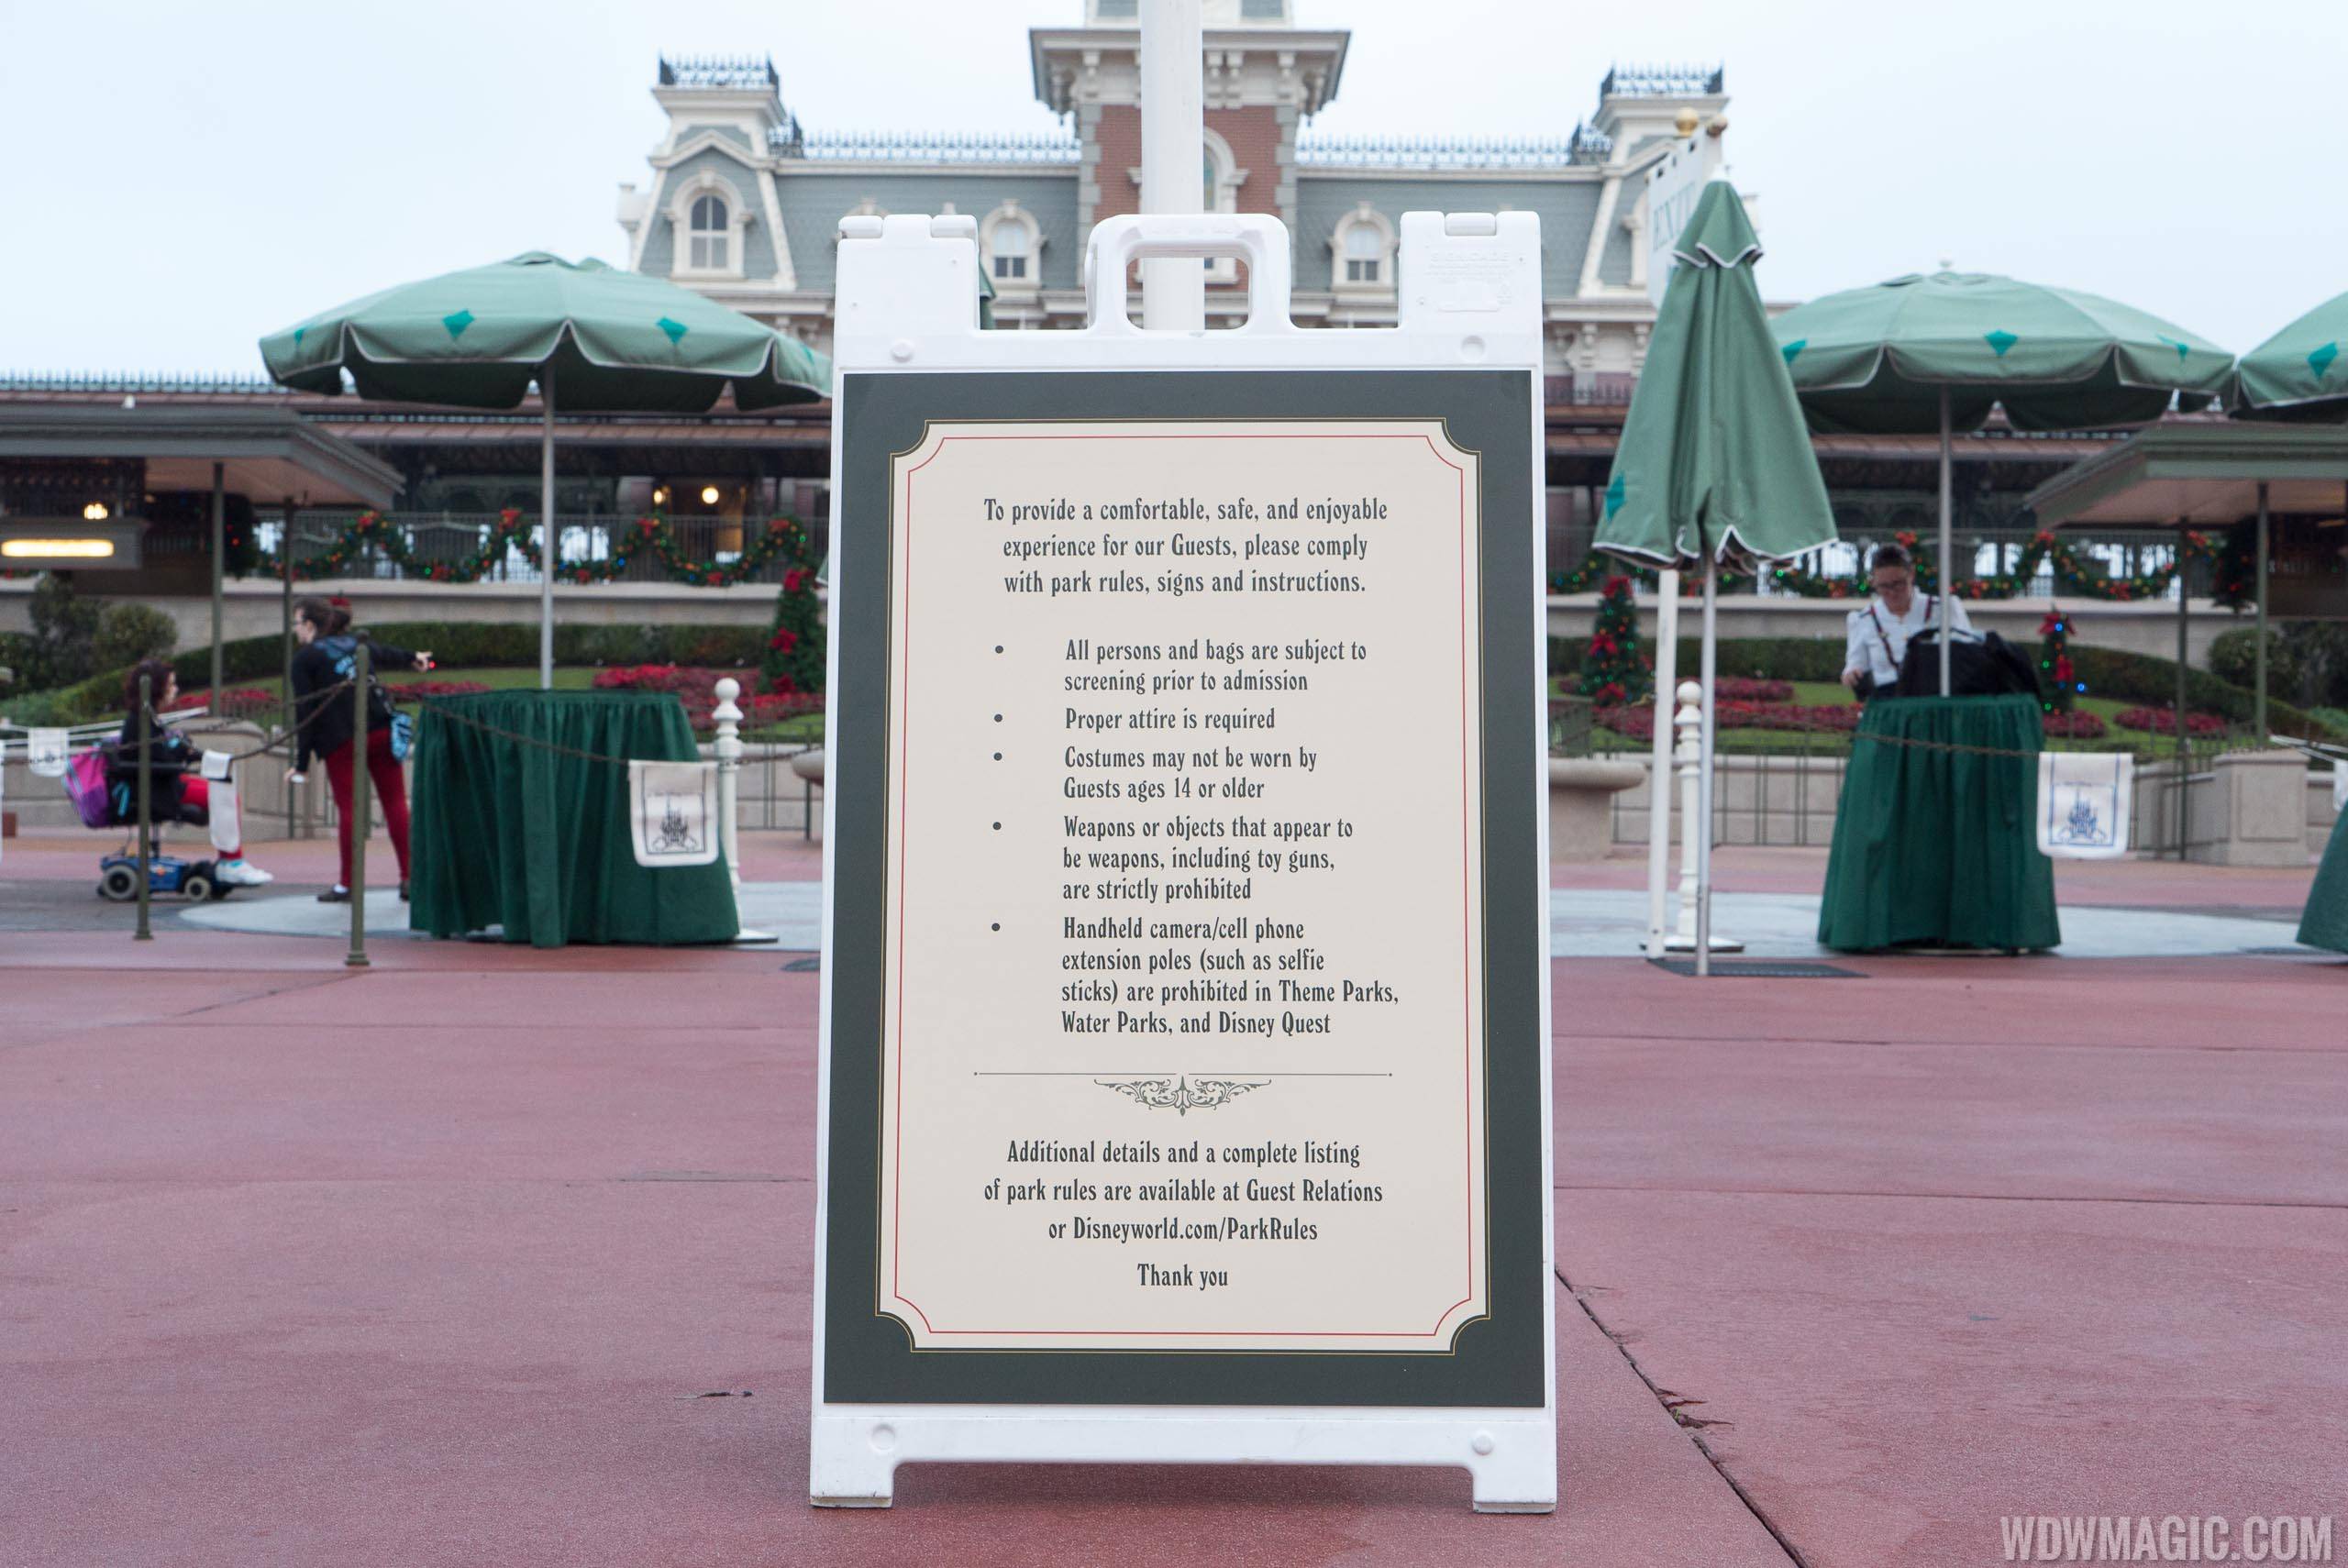 New Magic Kingdom entry policy banning toy guns and costumes for adults